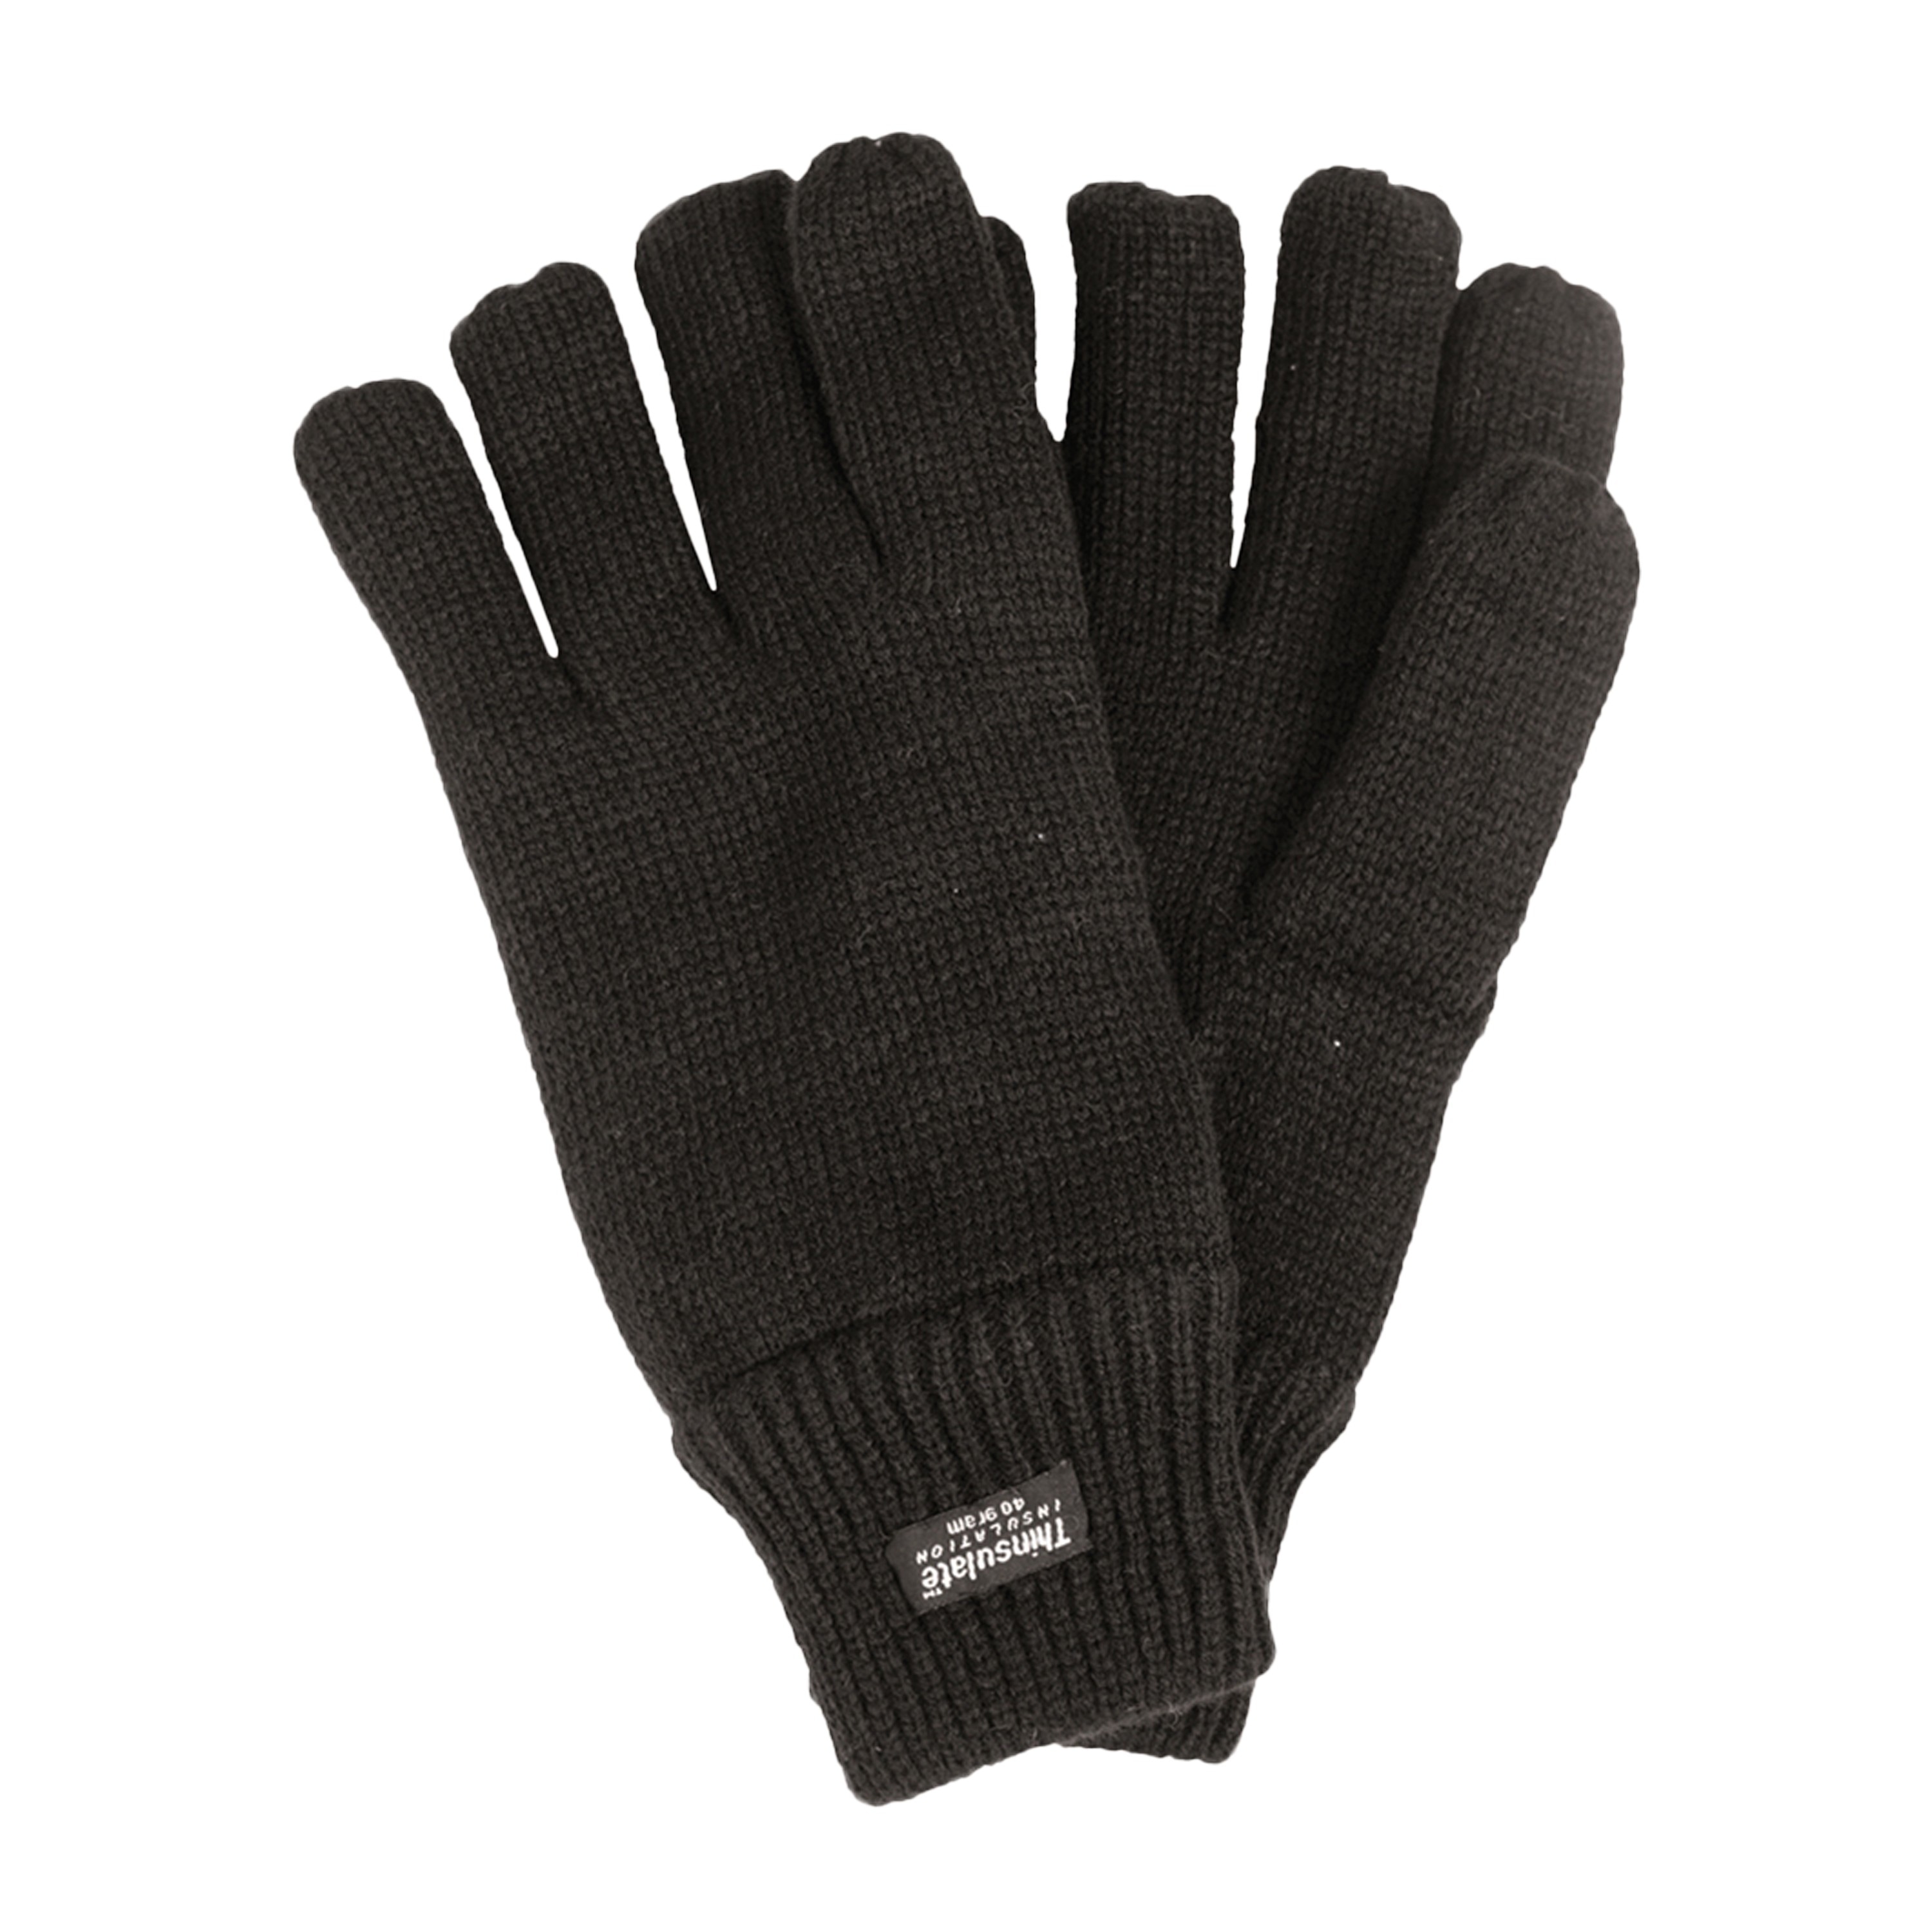 Thinsulate Gloves black | Thinsulate Gloves black | Thermal Gloves ...